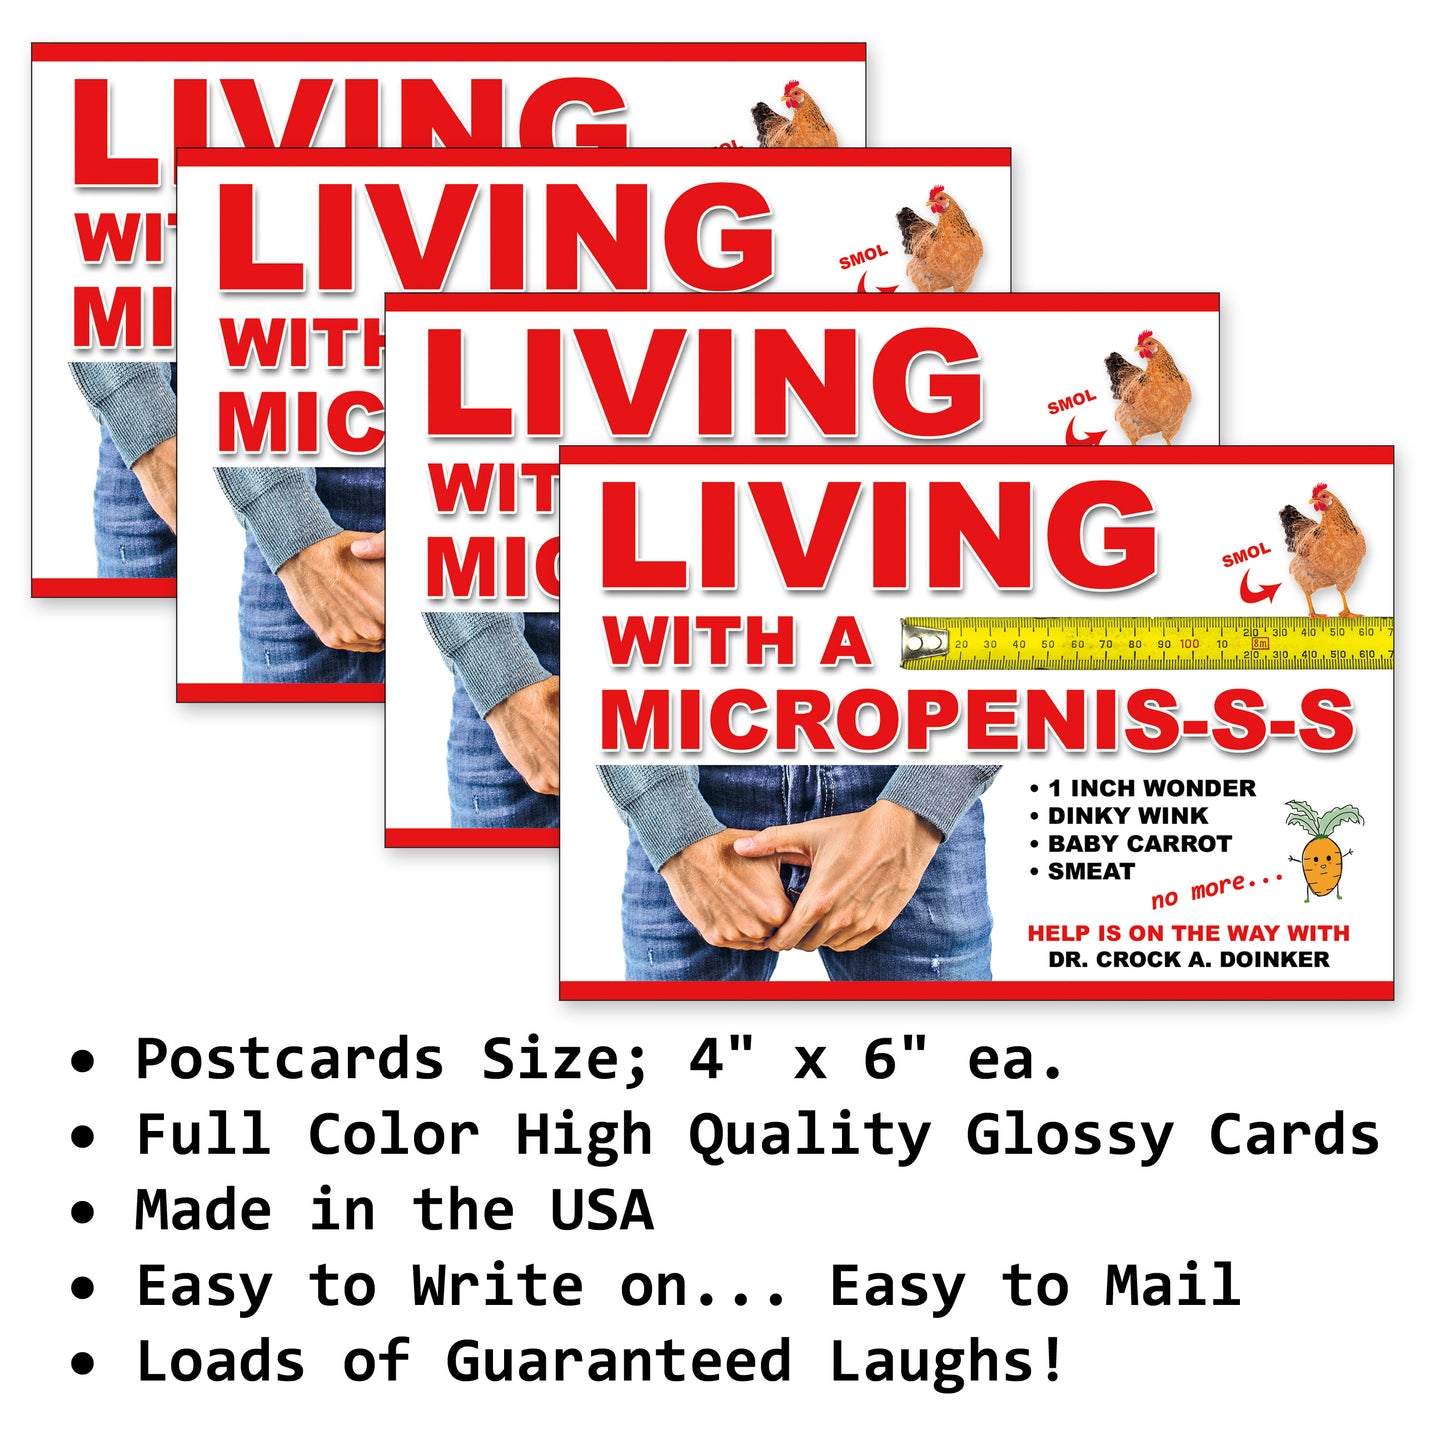 4 Pack Prank Micropenis Postcards sent to YOU so you can Play some Gags on your Friends yourself!